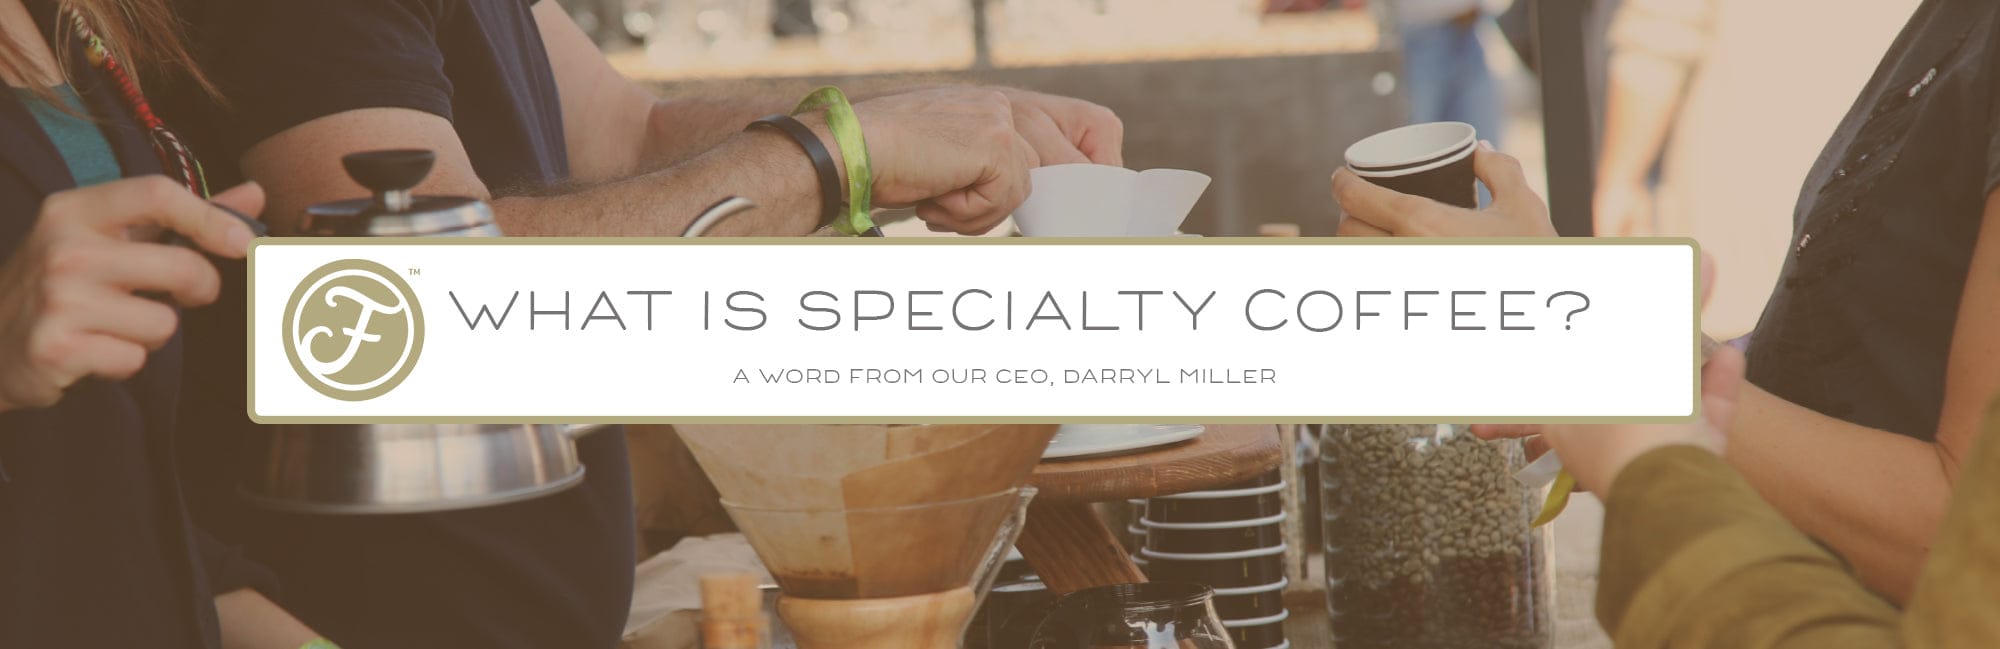 Specialty Coffee Banner